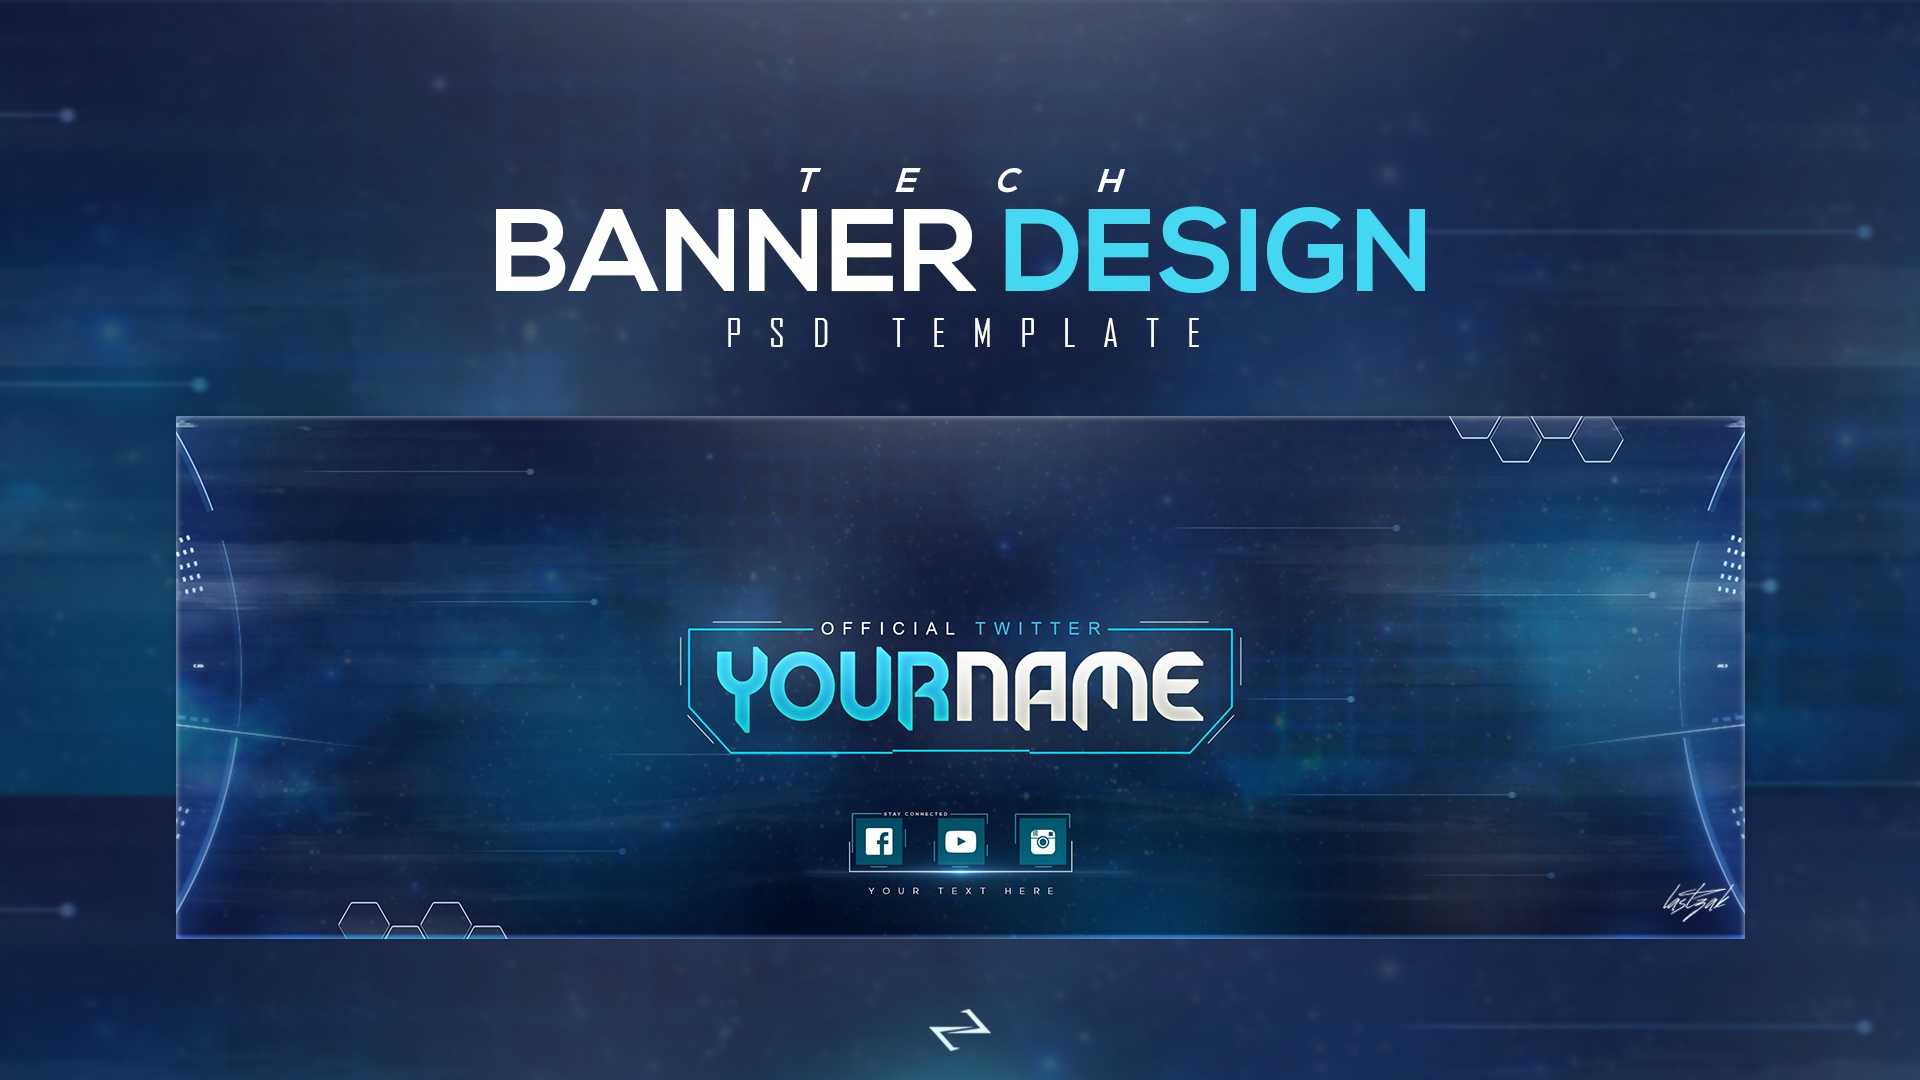 Free Tech Twitter Header Psd Template [Free To Use] - Lastzak18 Intended For Twitter Banner Template Psd